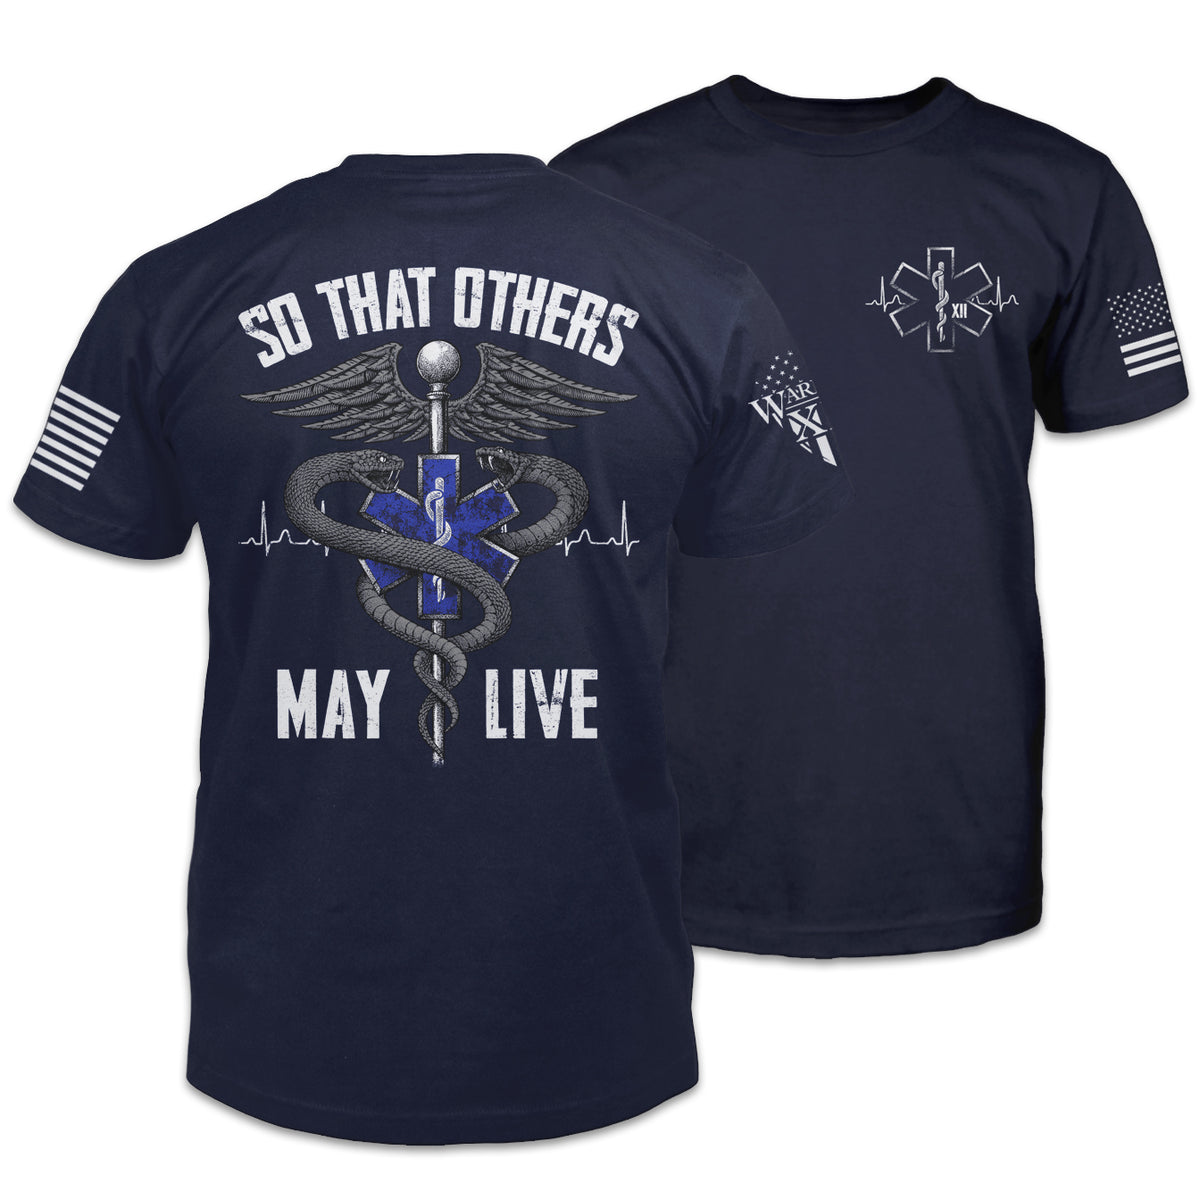 Front and back navy blue t-shirt with the words "So That Others May Live" with the health symbol printed on the shirt.